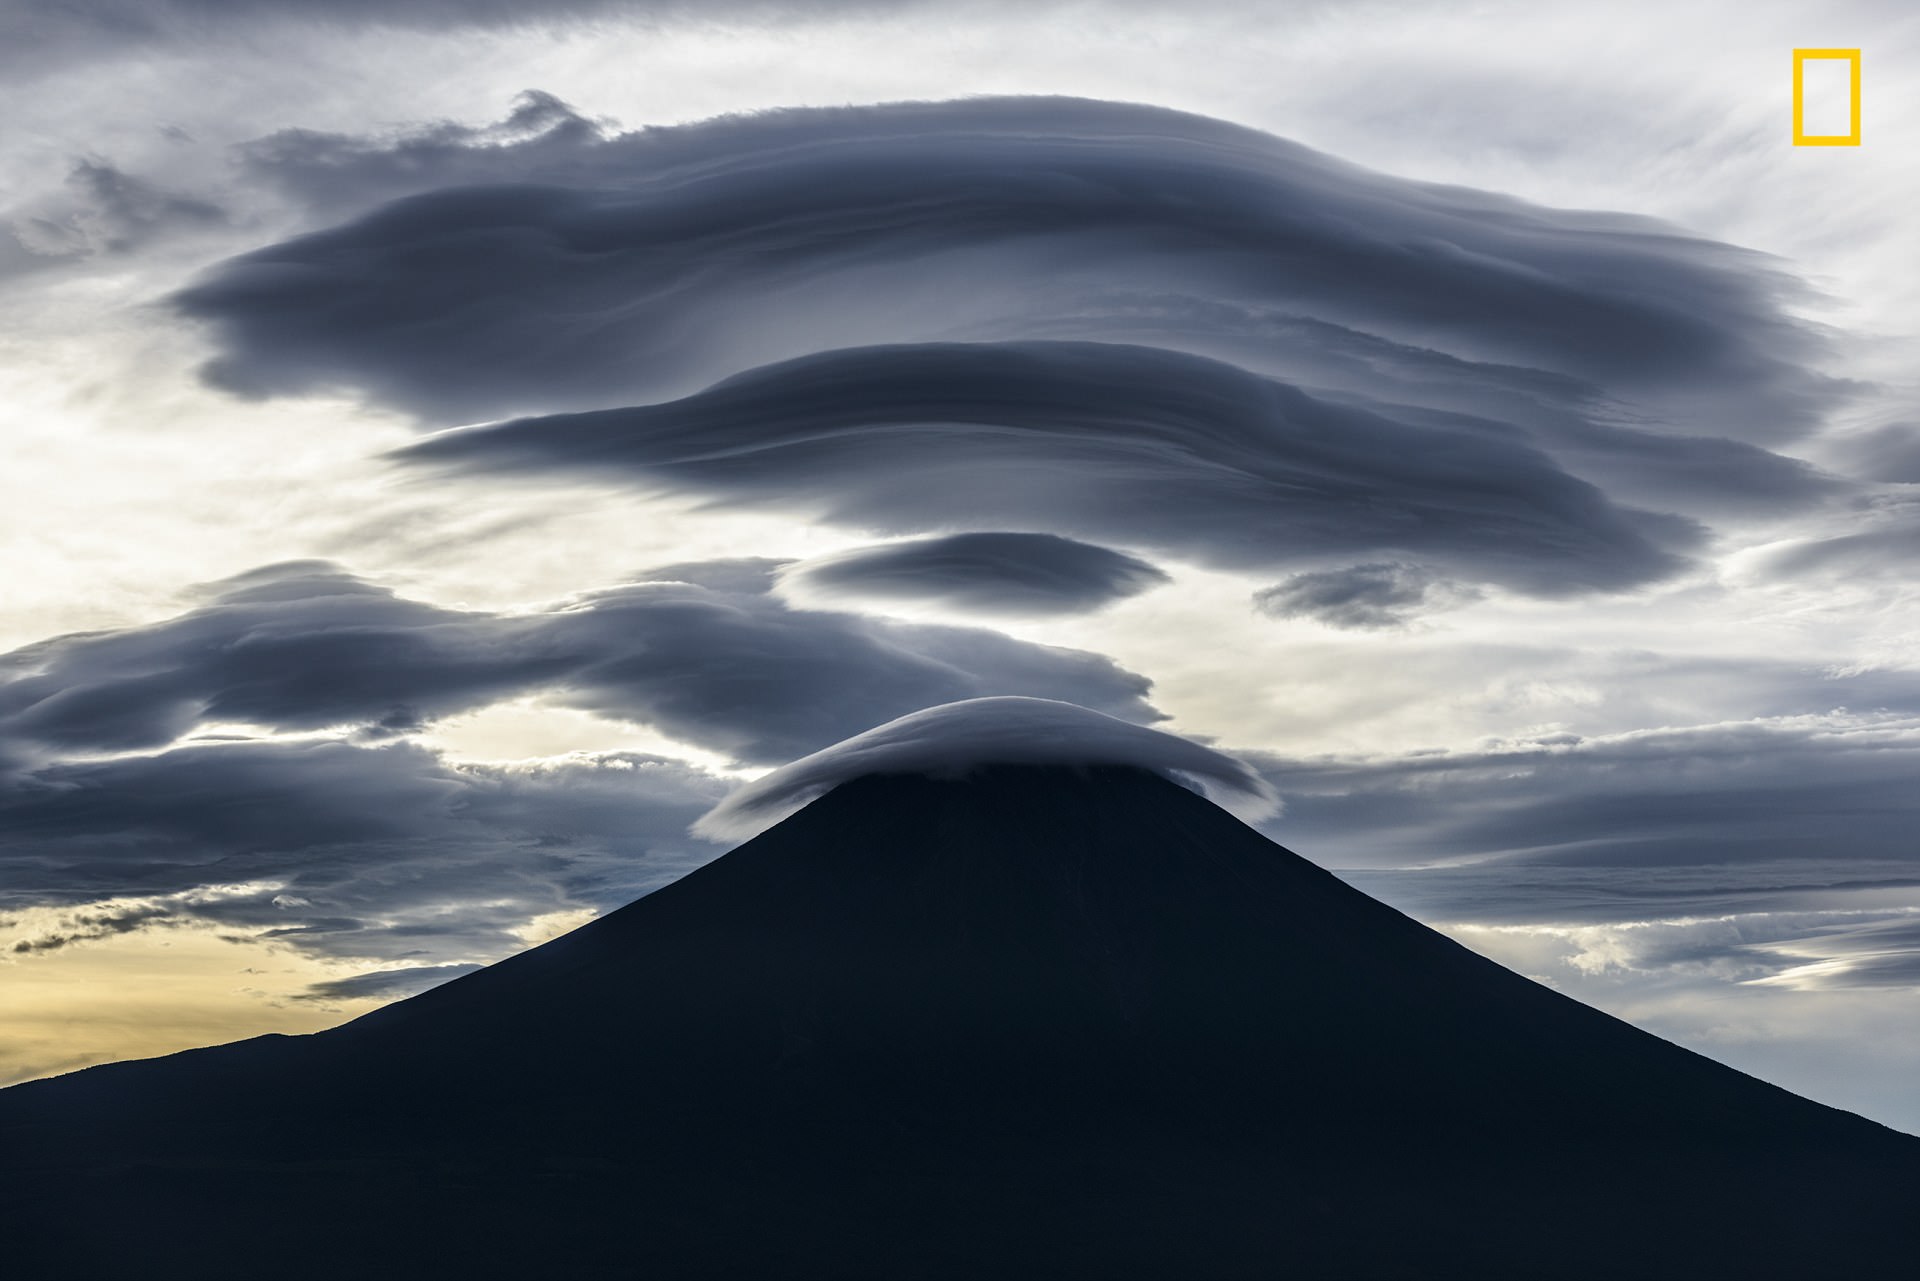 General 1920x1281 nature landscape mountains clouds National Geographic Mount Fuji Japan evening silhouette Asia